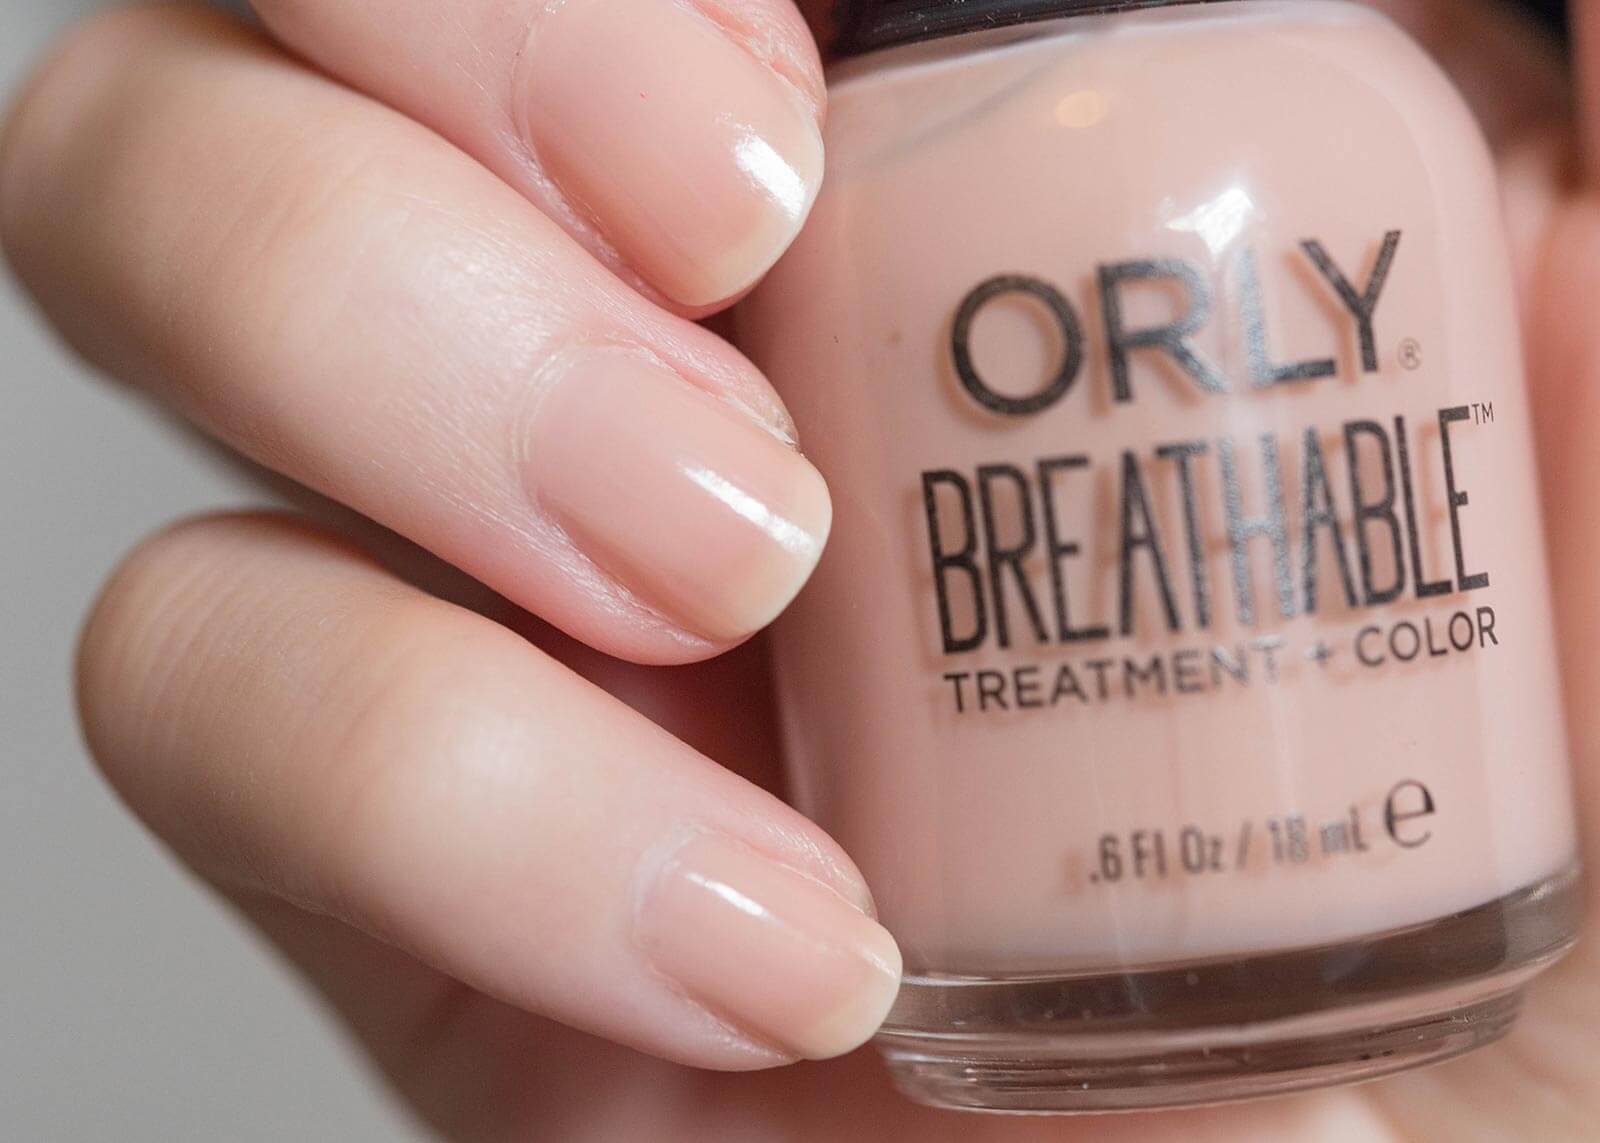 Nude Brown - Orly Breathable